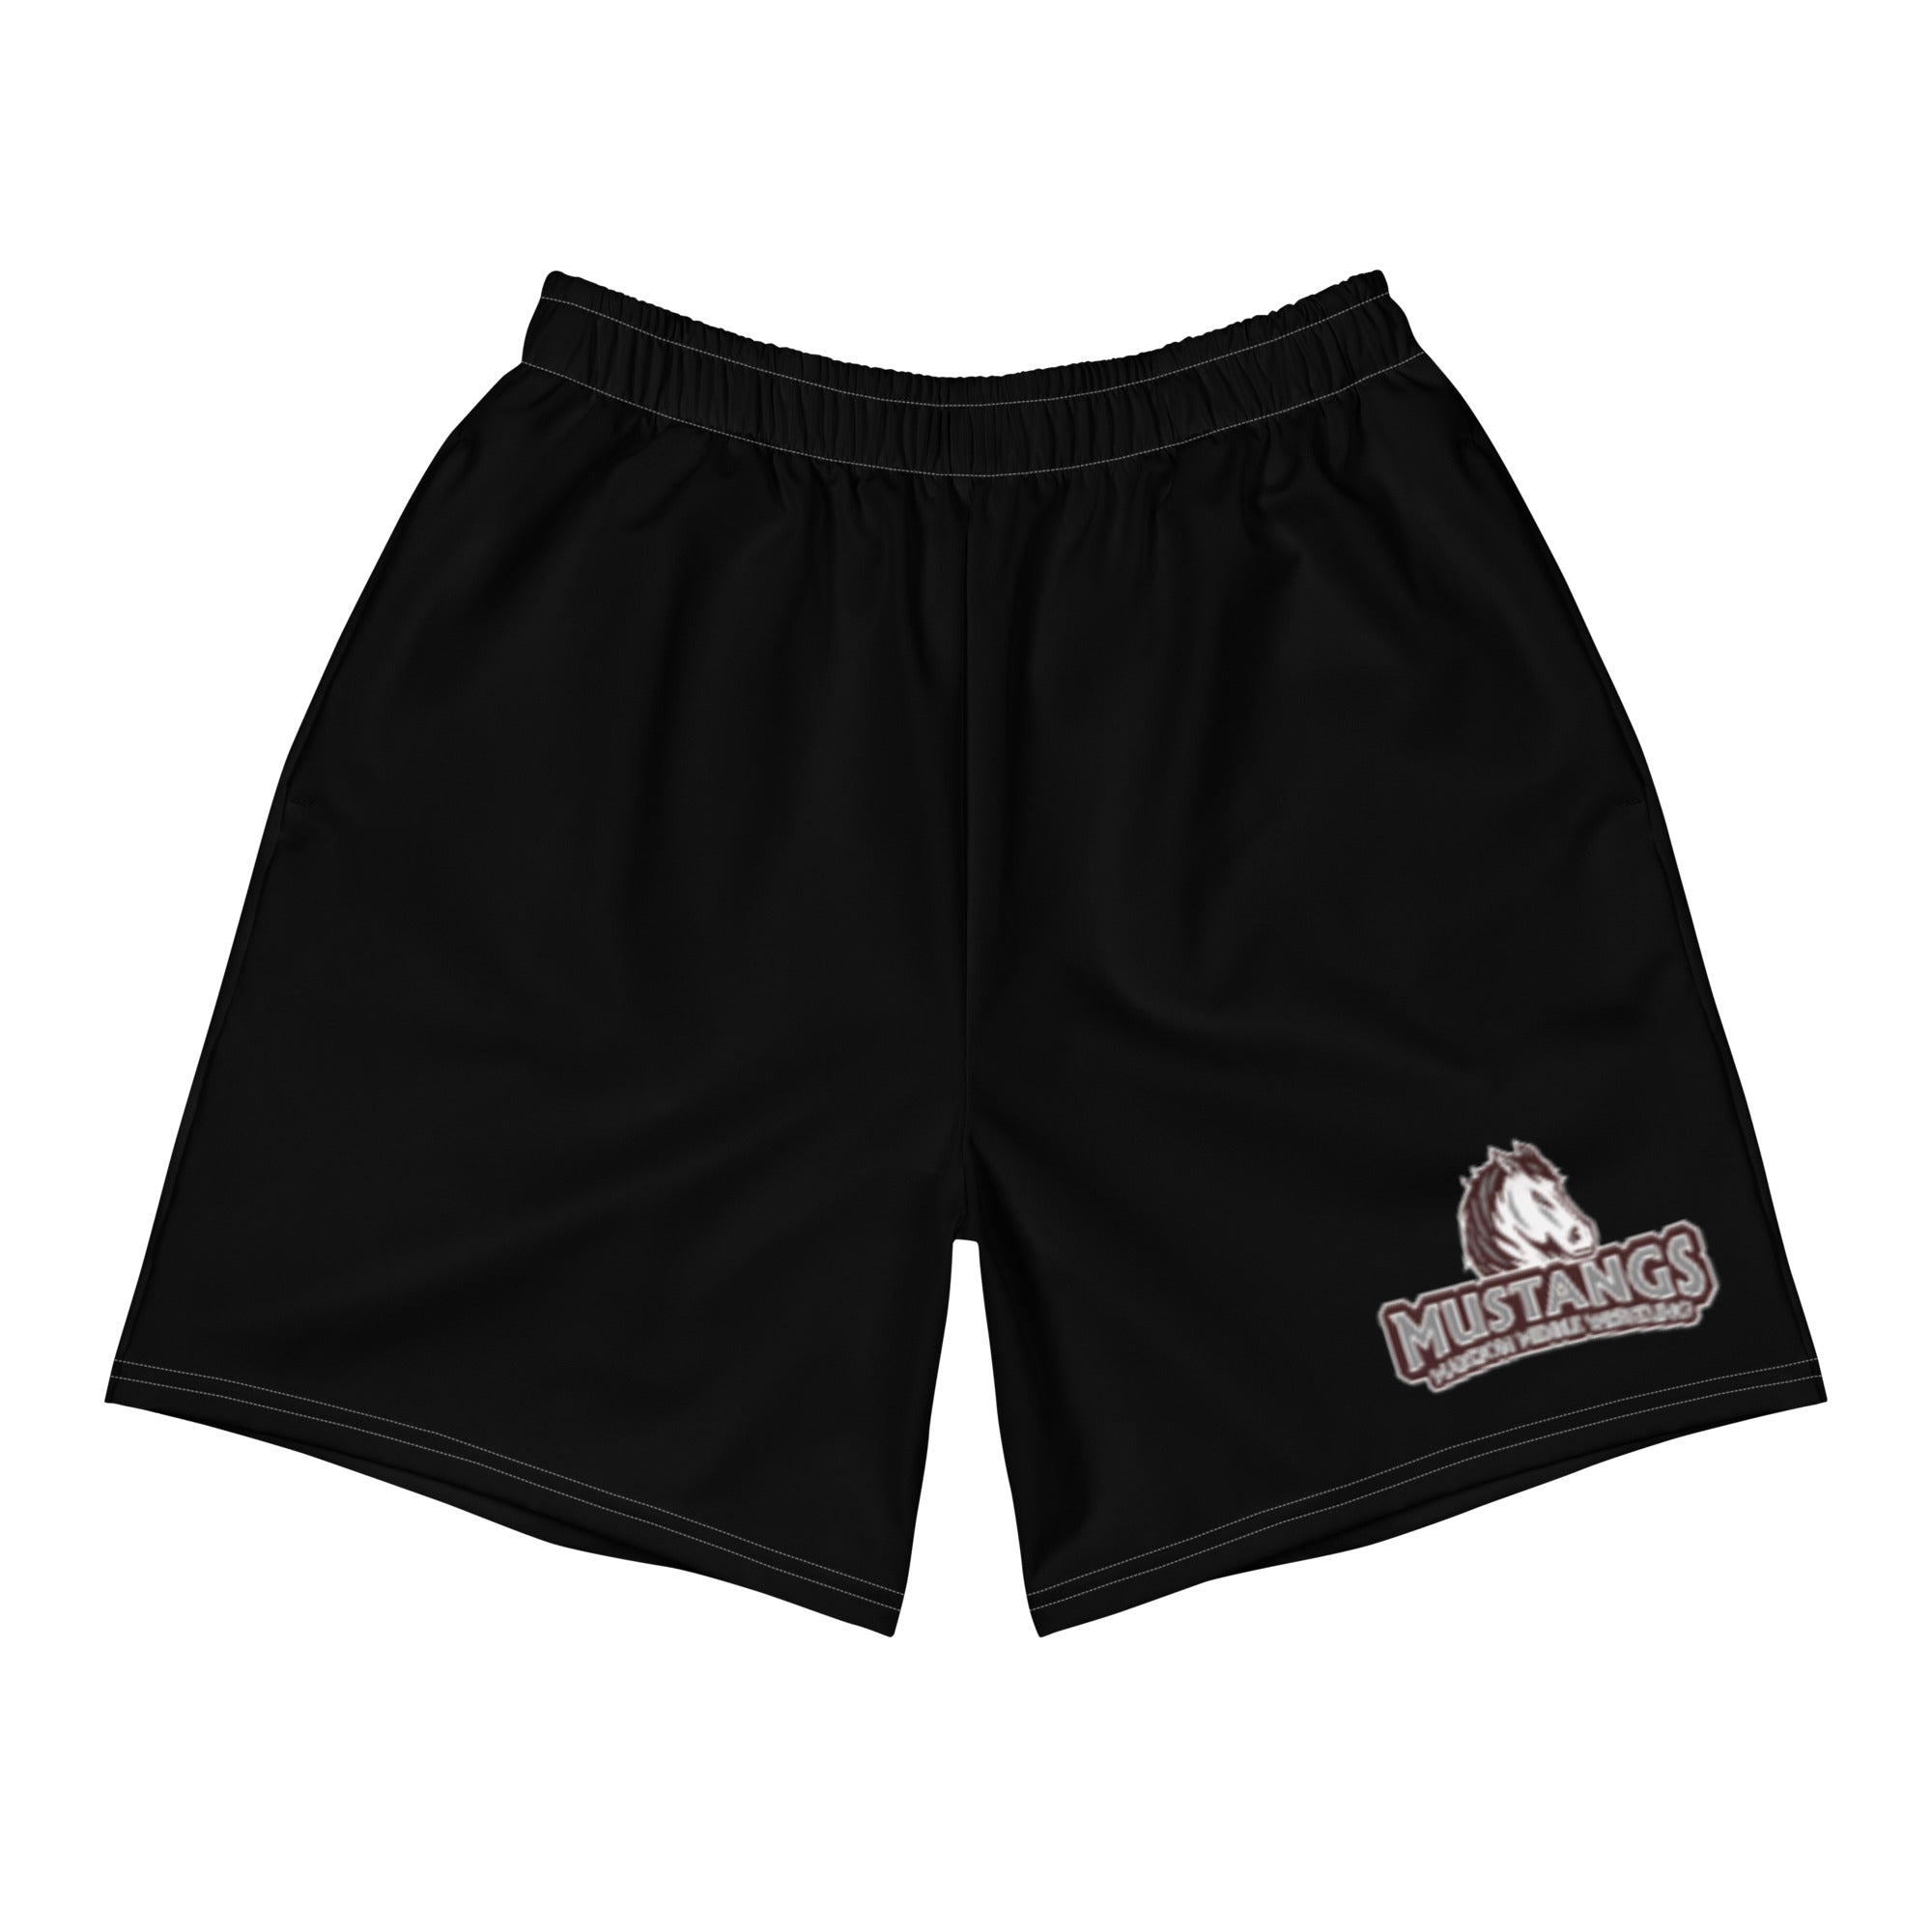 MMSW Men's Recycled Athletic Shorts